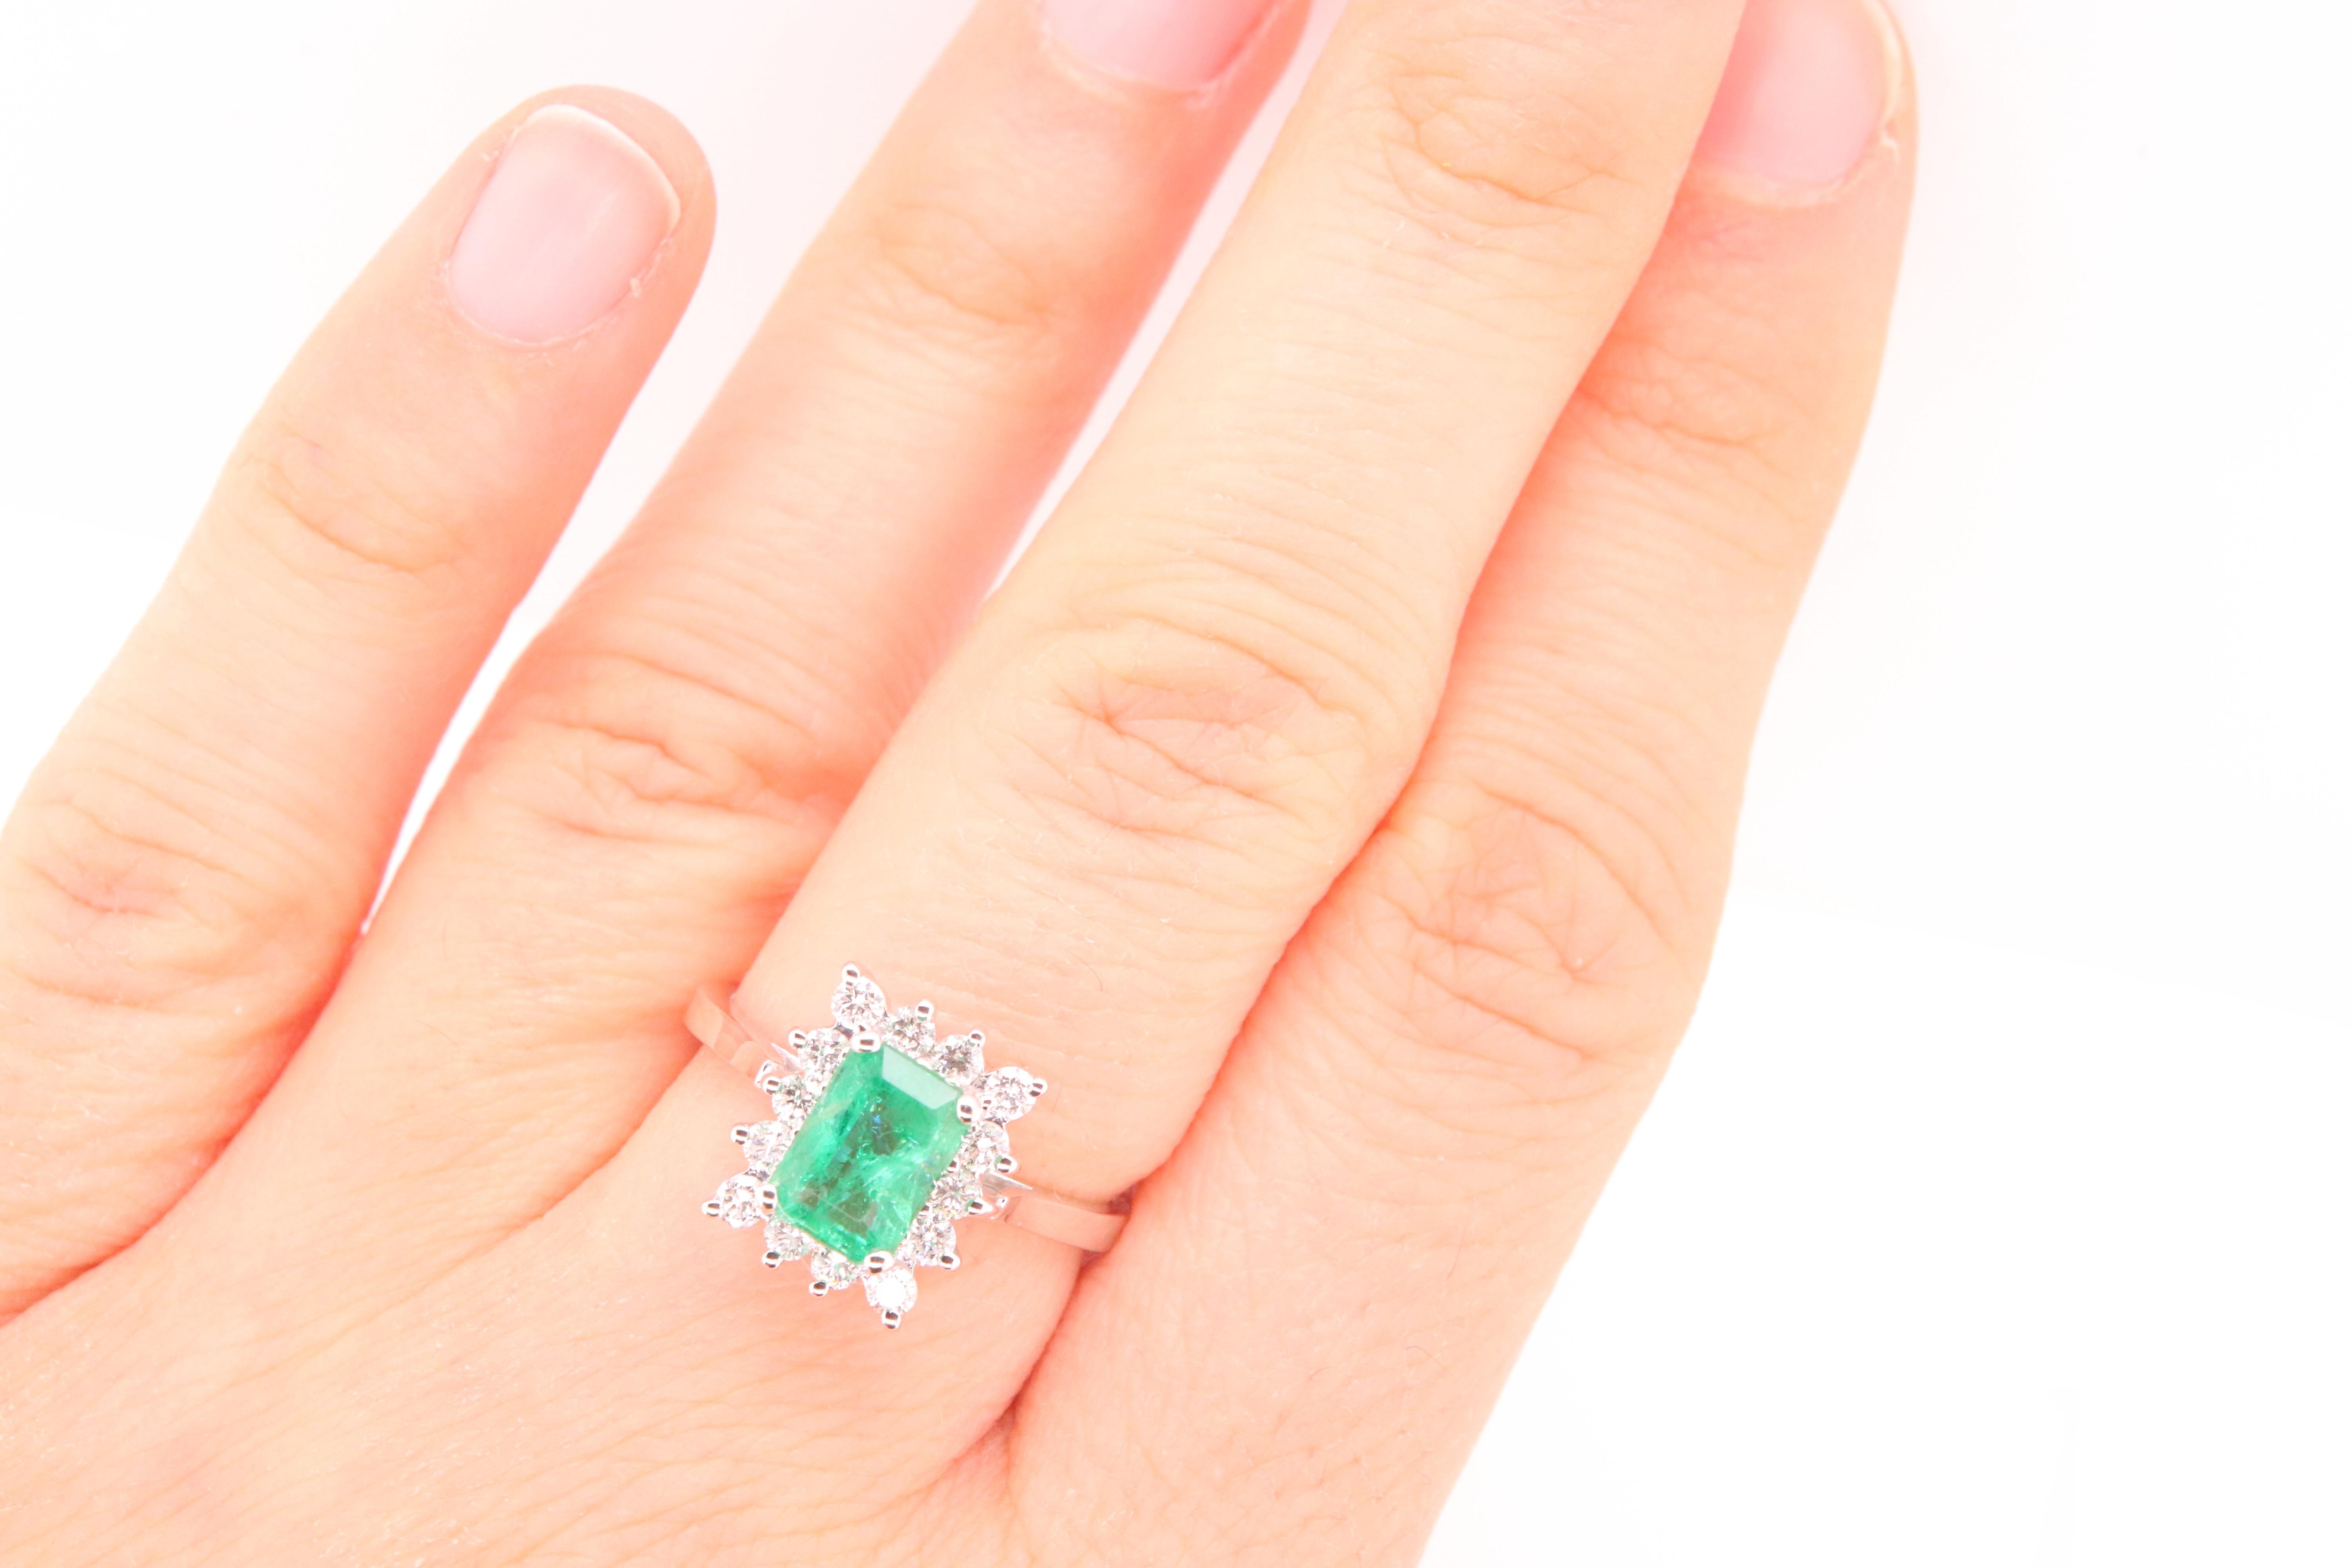 Material: 14k White Gold 
Center Stone Details: 1 Emerald Cut Emerald at 0.89 Carats - Measuring 7 x 5 mm
Diamond Details: 5 Brilliant Round Diamonds at 0.35 Carats - Clarity: SI / Color: H-I
Ring Size: 5.5. Alberto offers complimentary sizing on